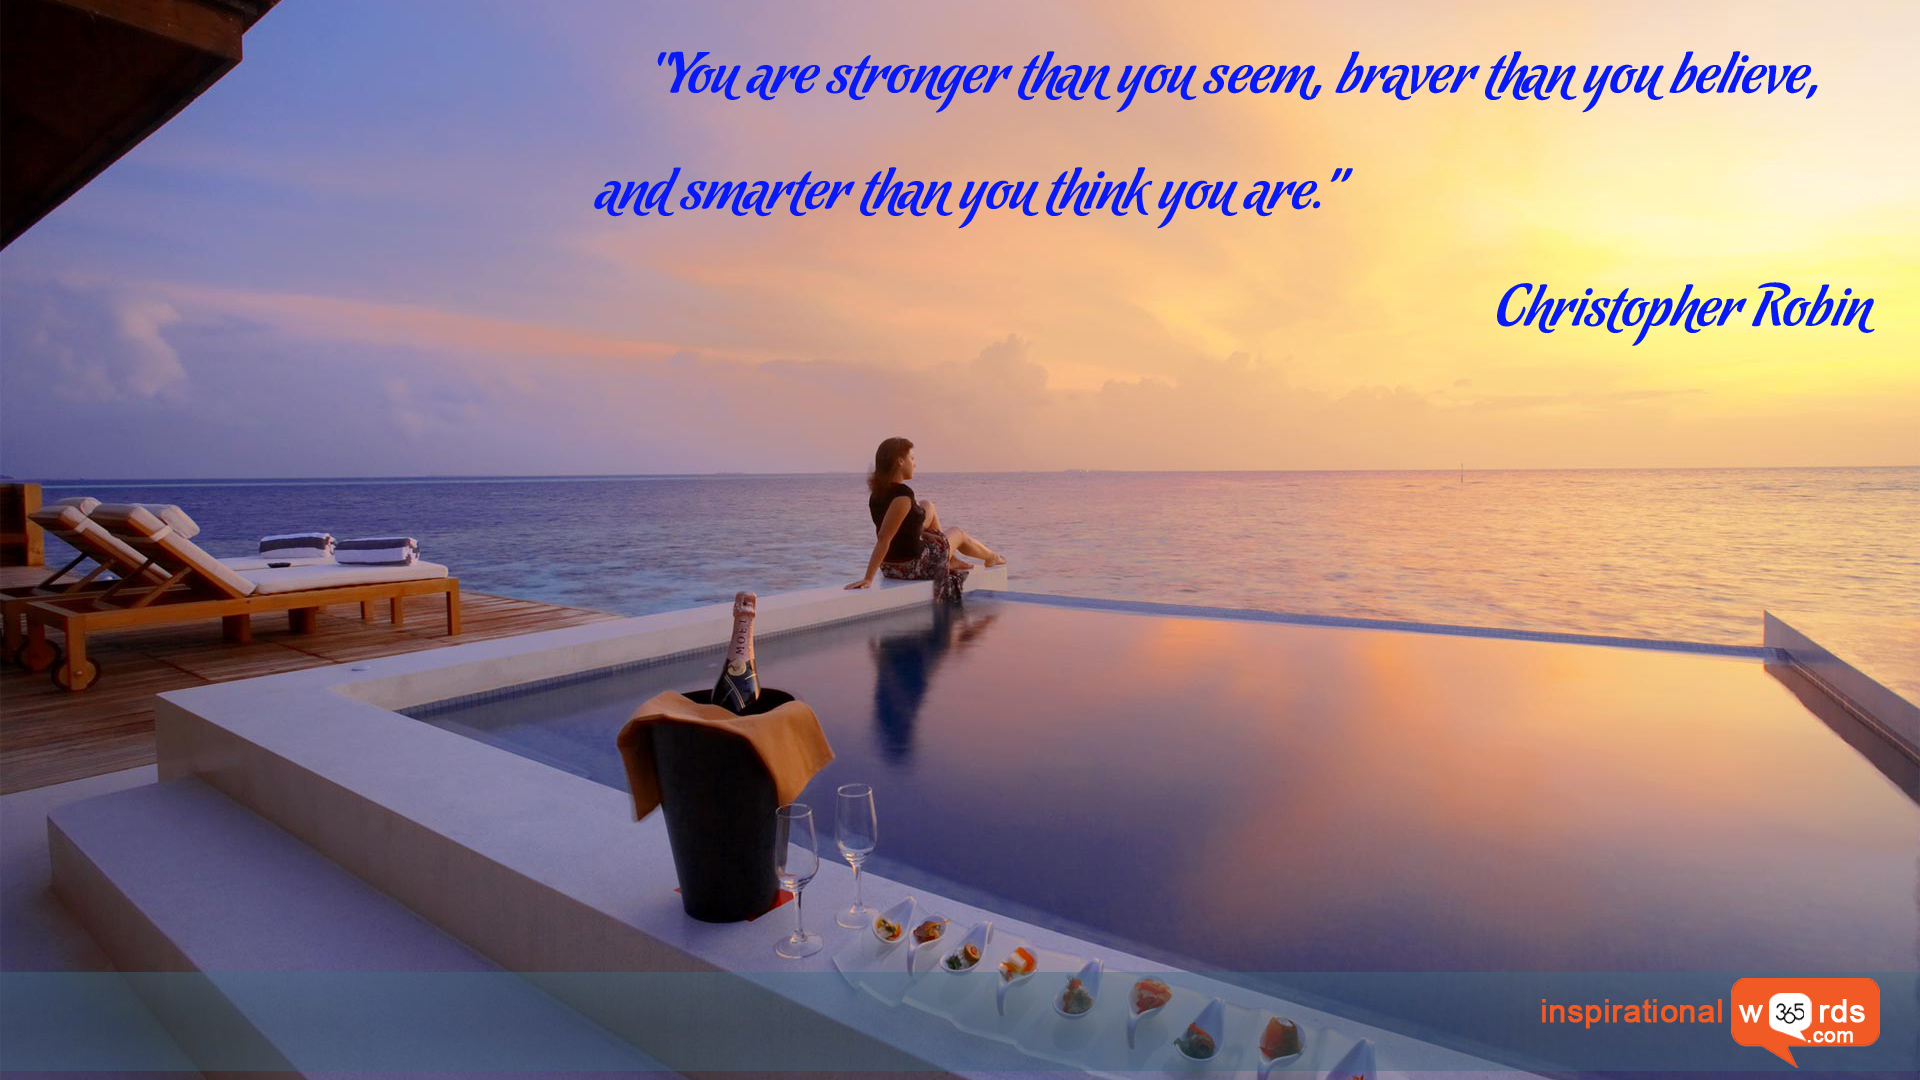 Inspirational Wallpaper Quote by Christopher Robin | Inspirational Words